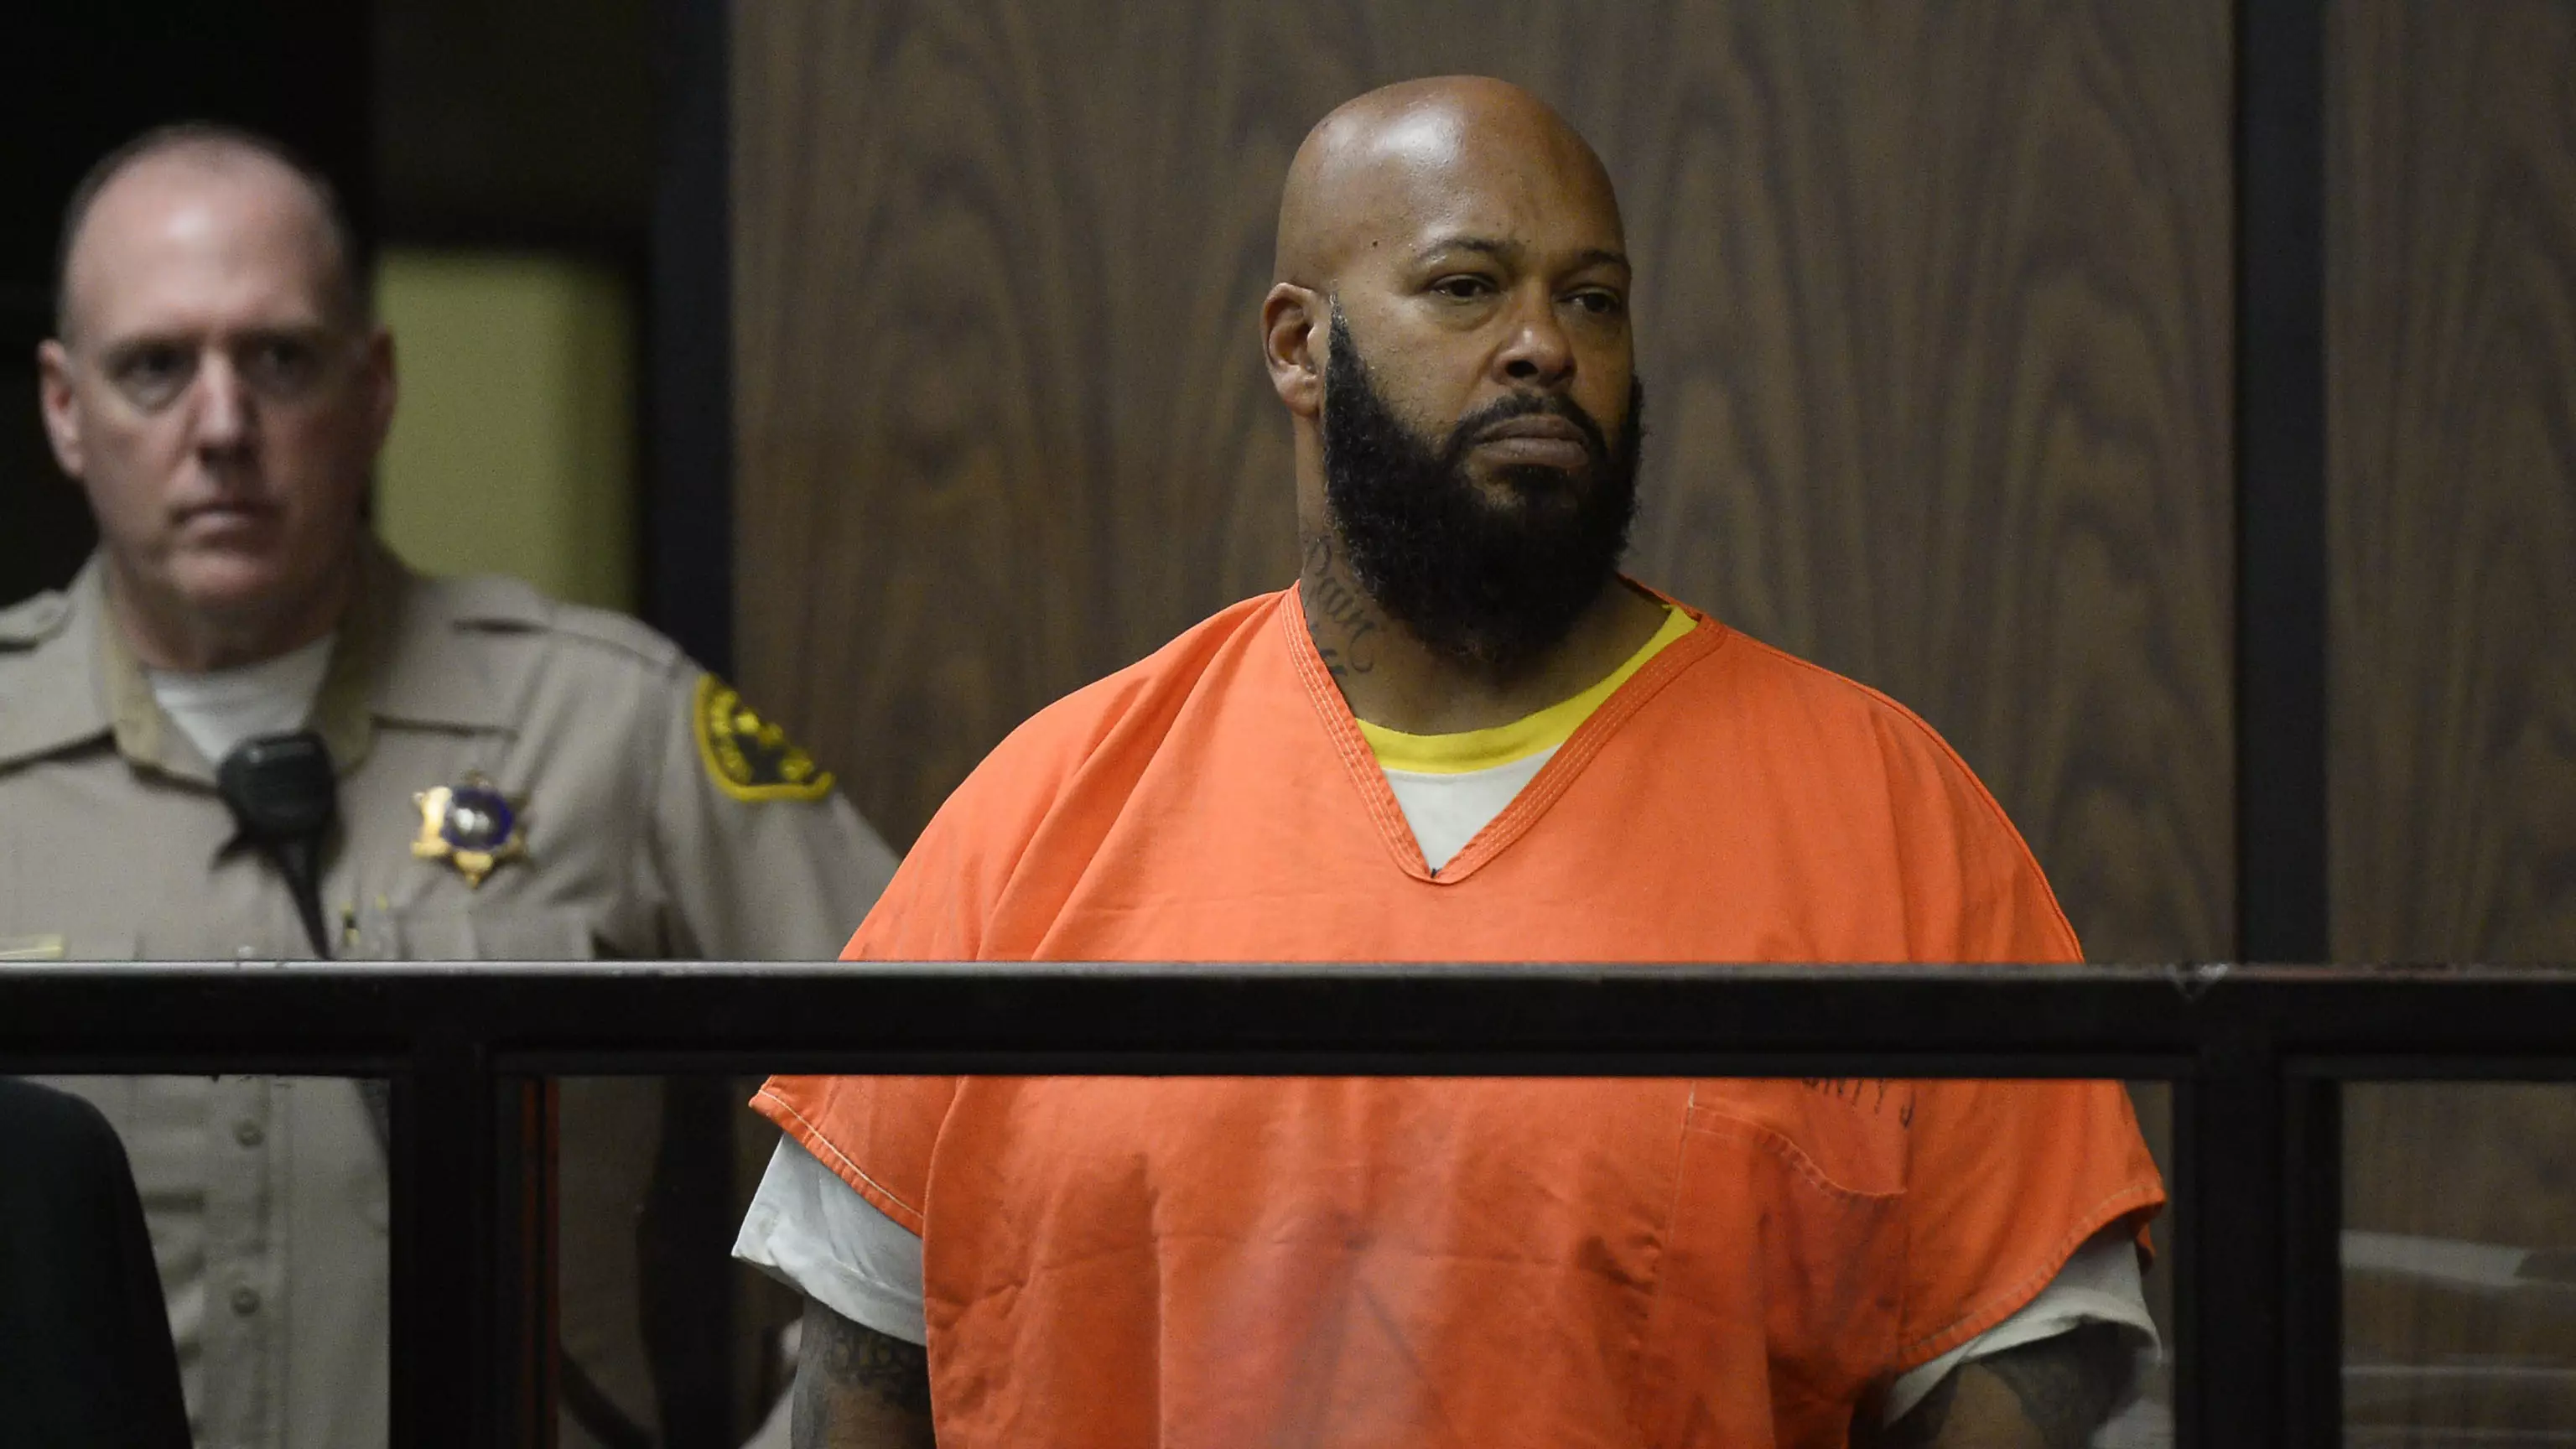 Court Unlikely To Allow Suge Knight To Attend His Mum's Funeral